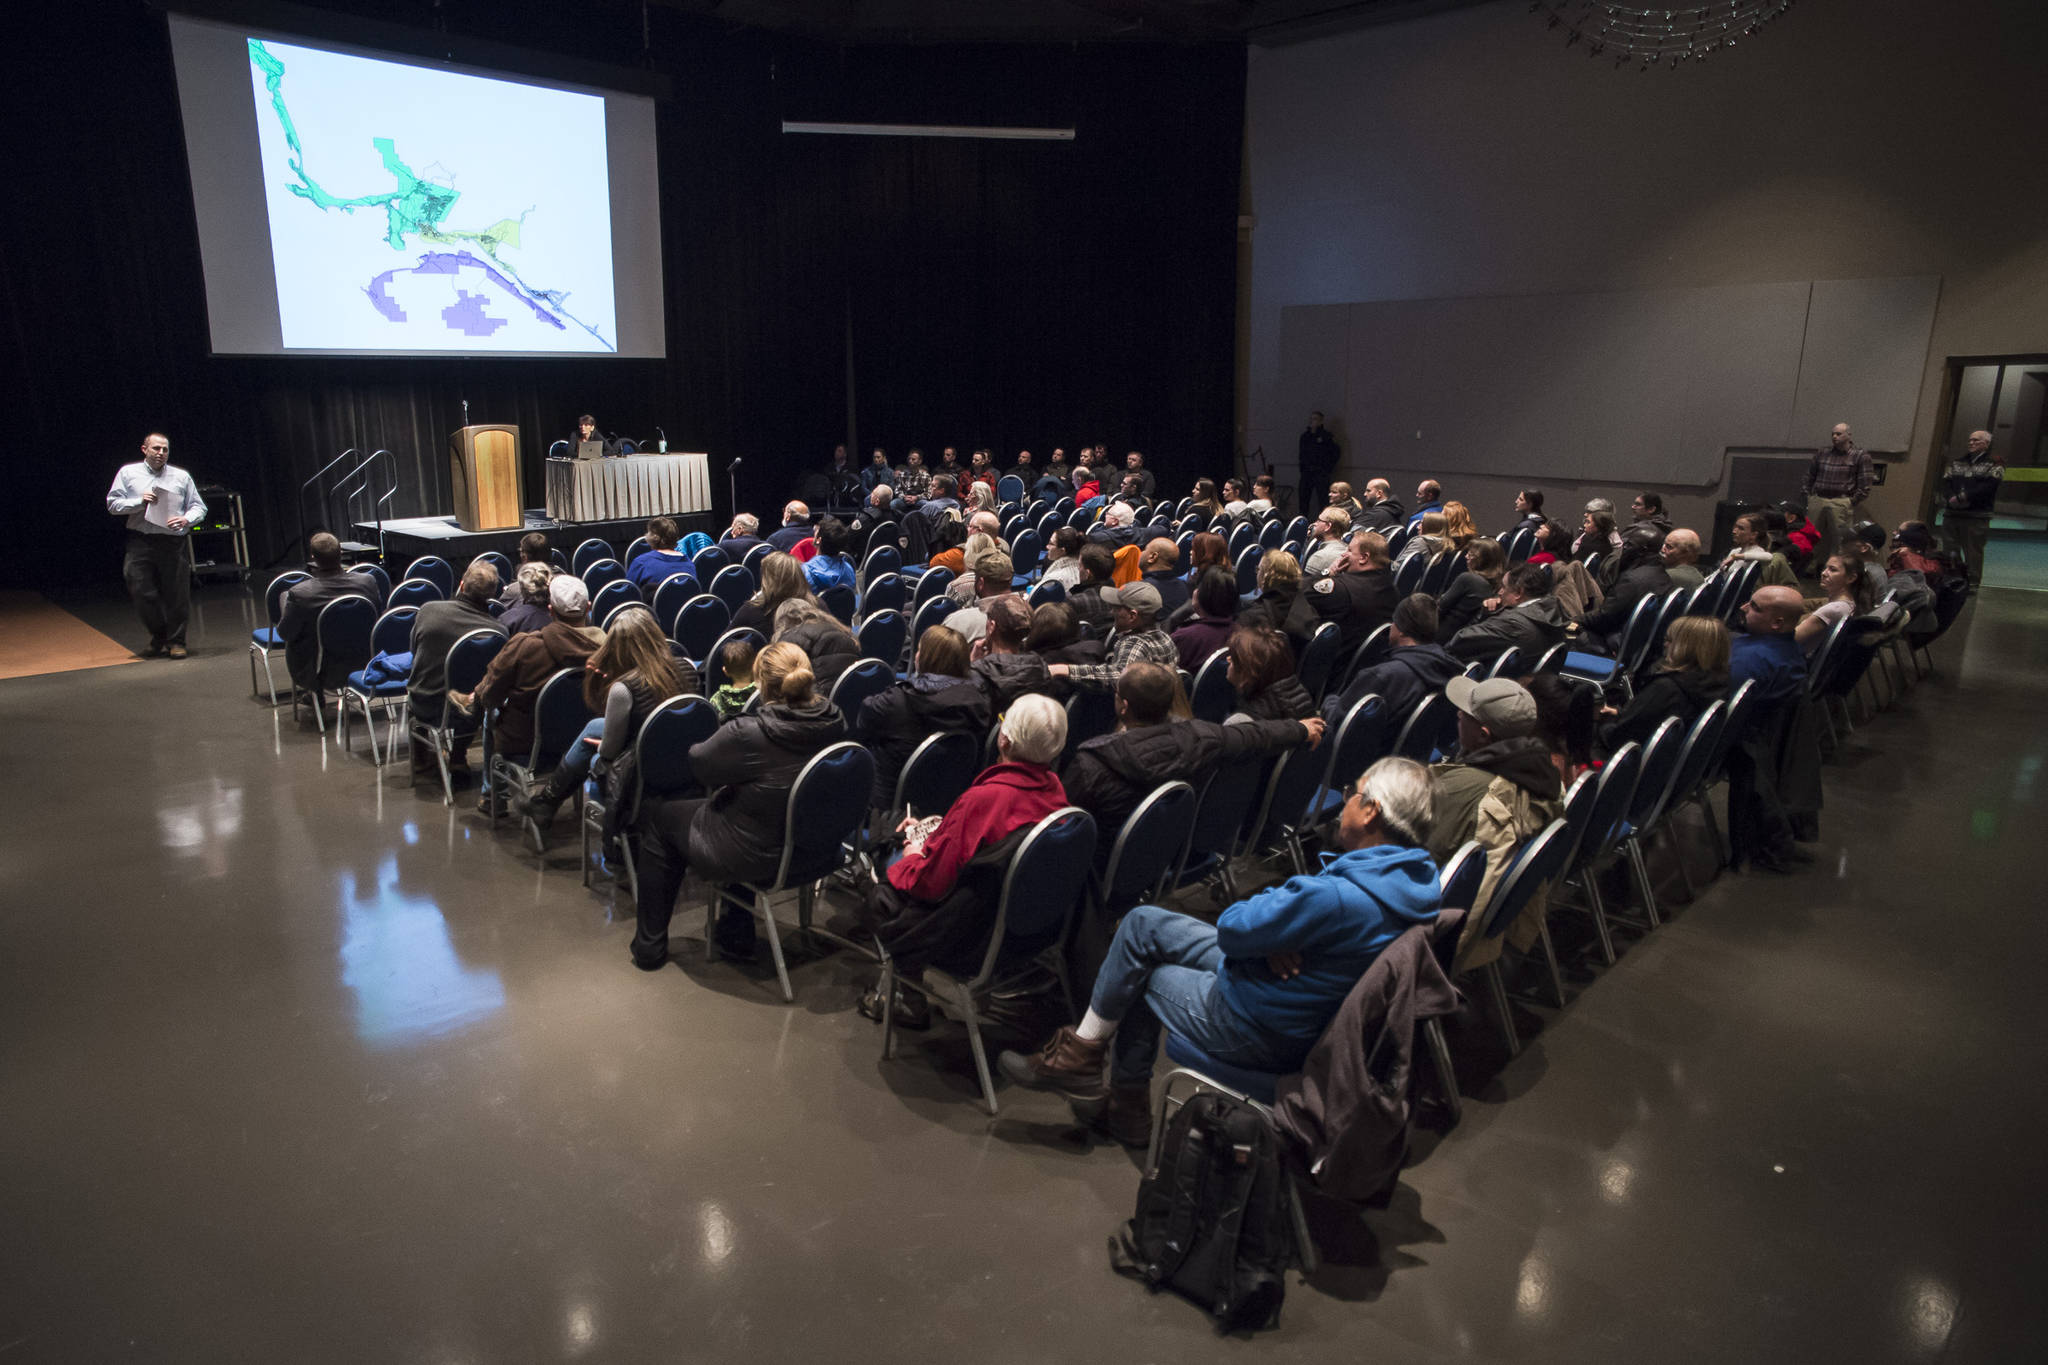 Juneau Police Department Sgt. Sterling Salisbury gives a presentation during an open house on crime in Juneau at Centennial Hall on Thursday, Jan. 10, 2019. The meeting was organized by members of the Public Safety Employees Association. (Michael Penn | Juneau Empire)